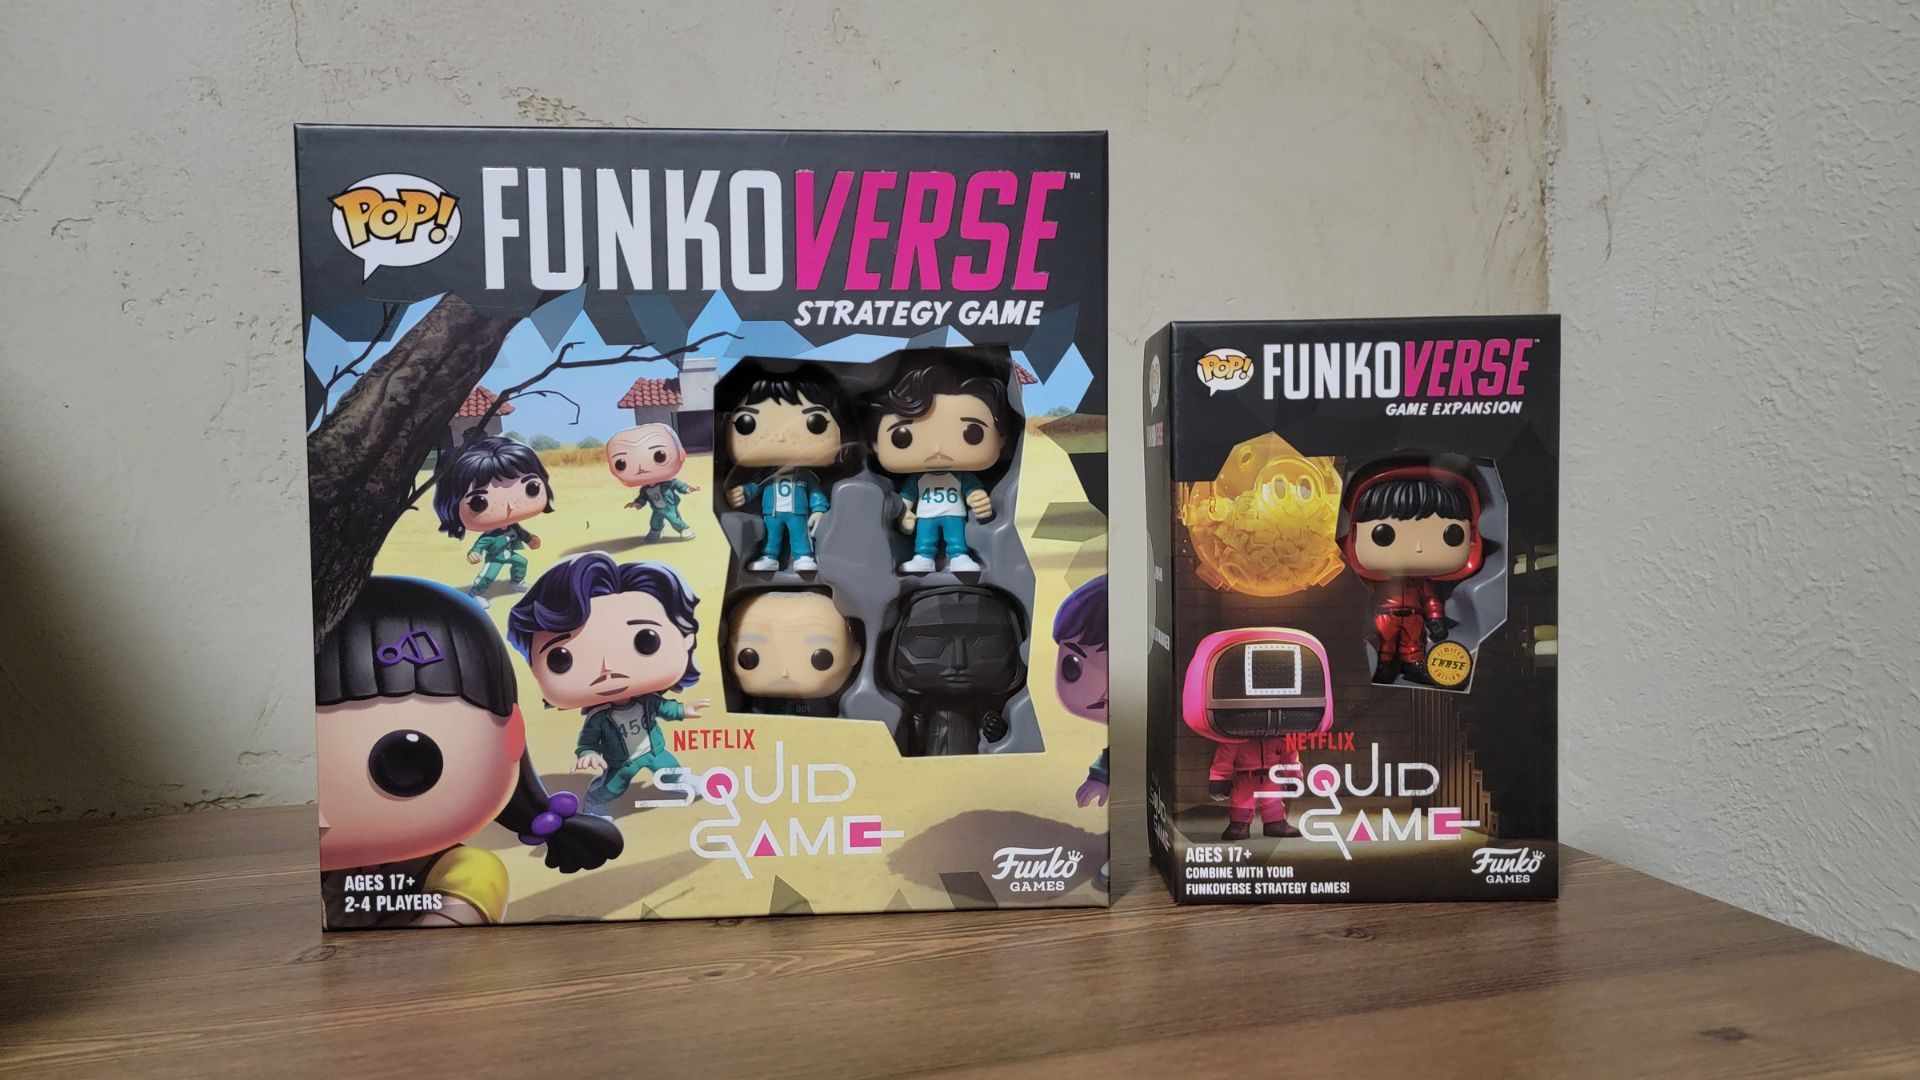 Funko Pop! Television: Squid Game Collectors Set - Netflix 3 Figure Set  Includes: Player 456, Player 001, and Masked Worker